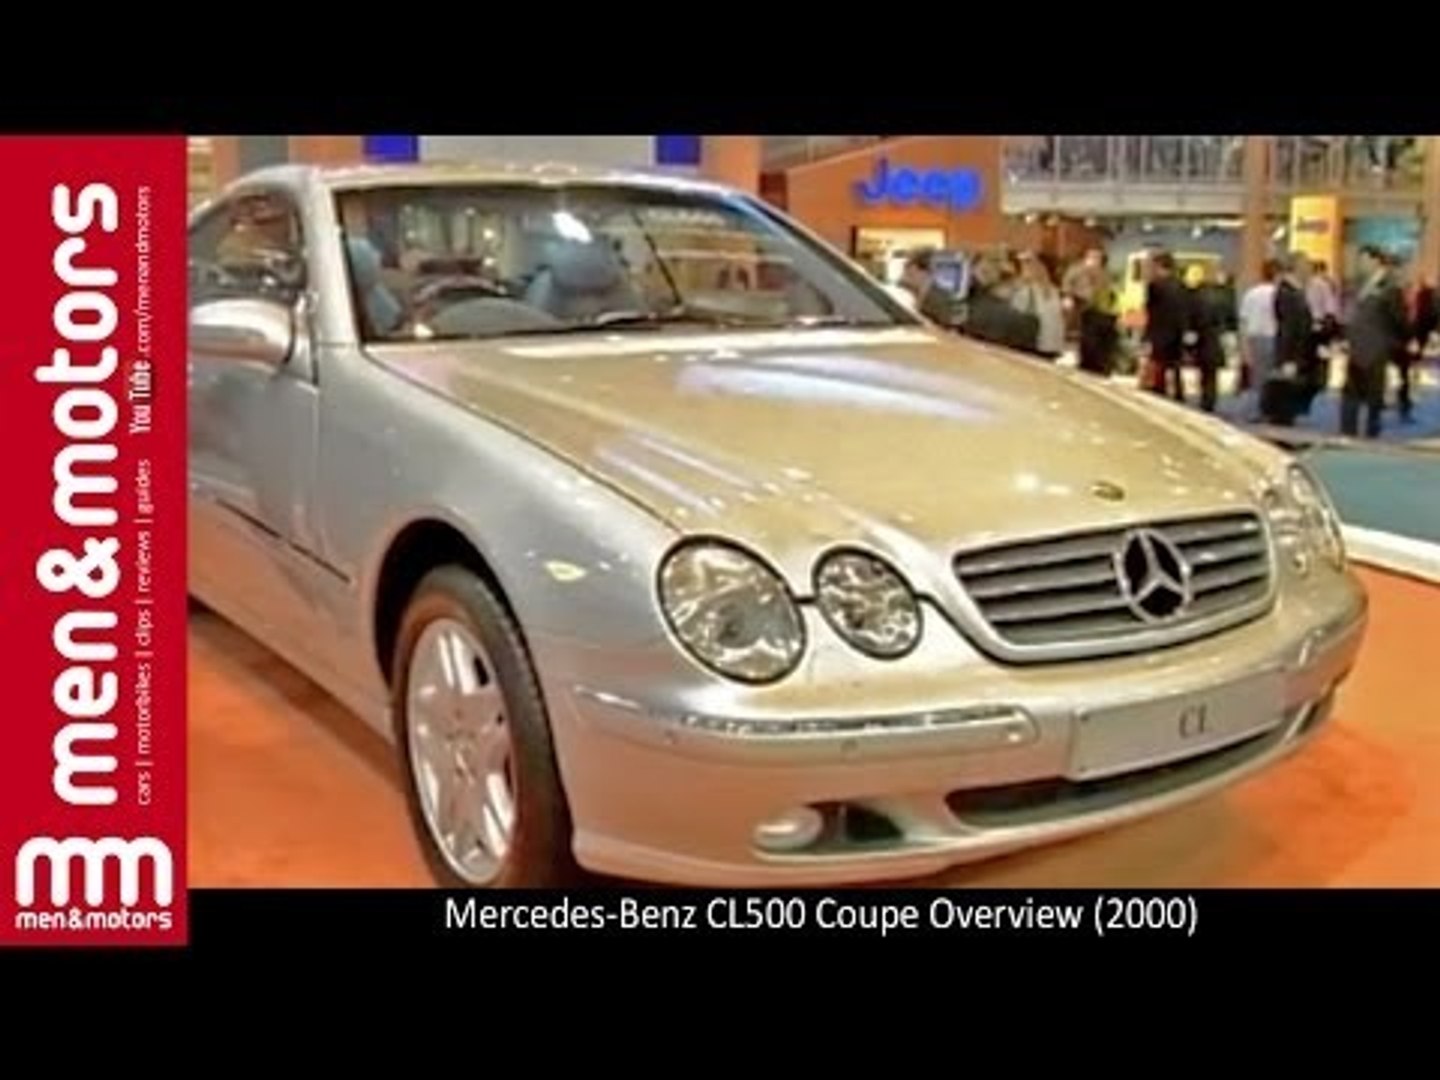 Mercedes Benz Cl500 Coupe Overview 2000 Video Dailymotion